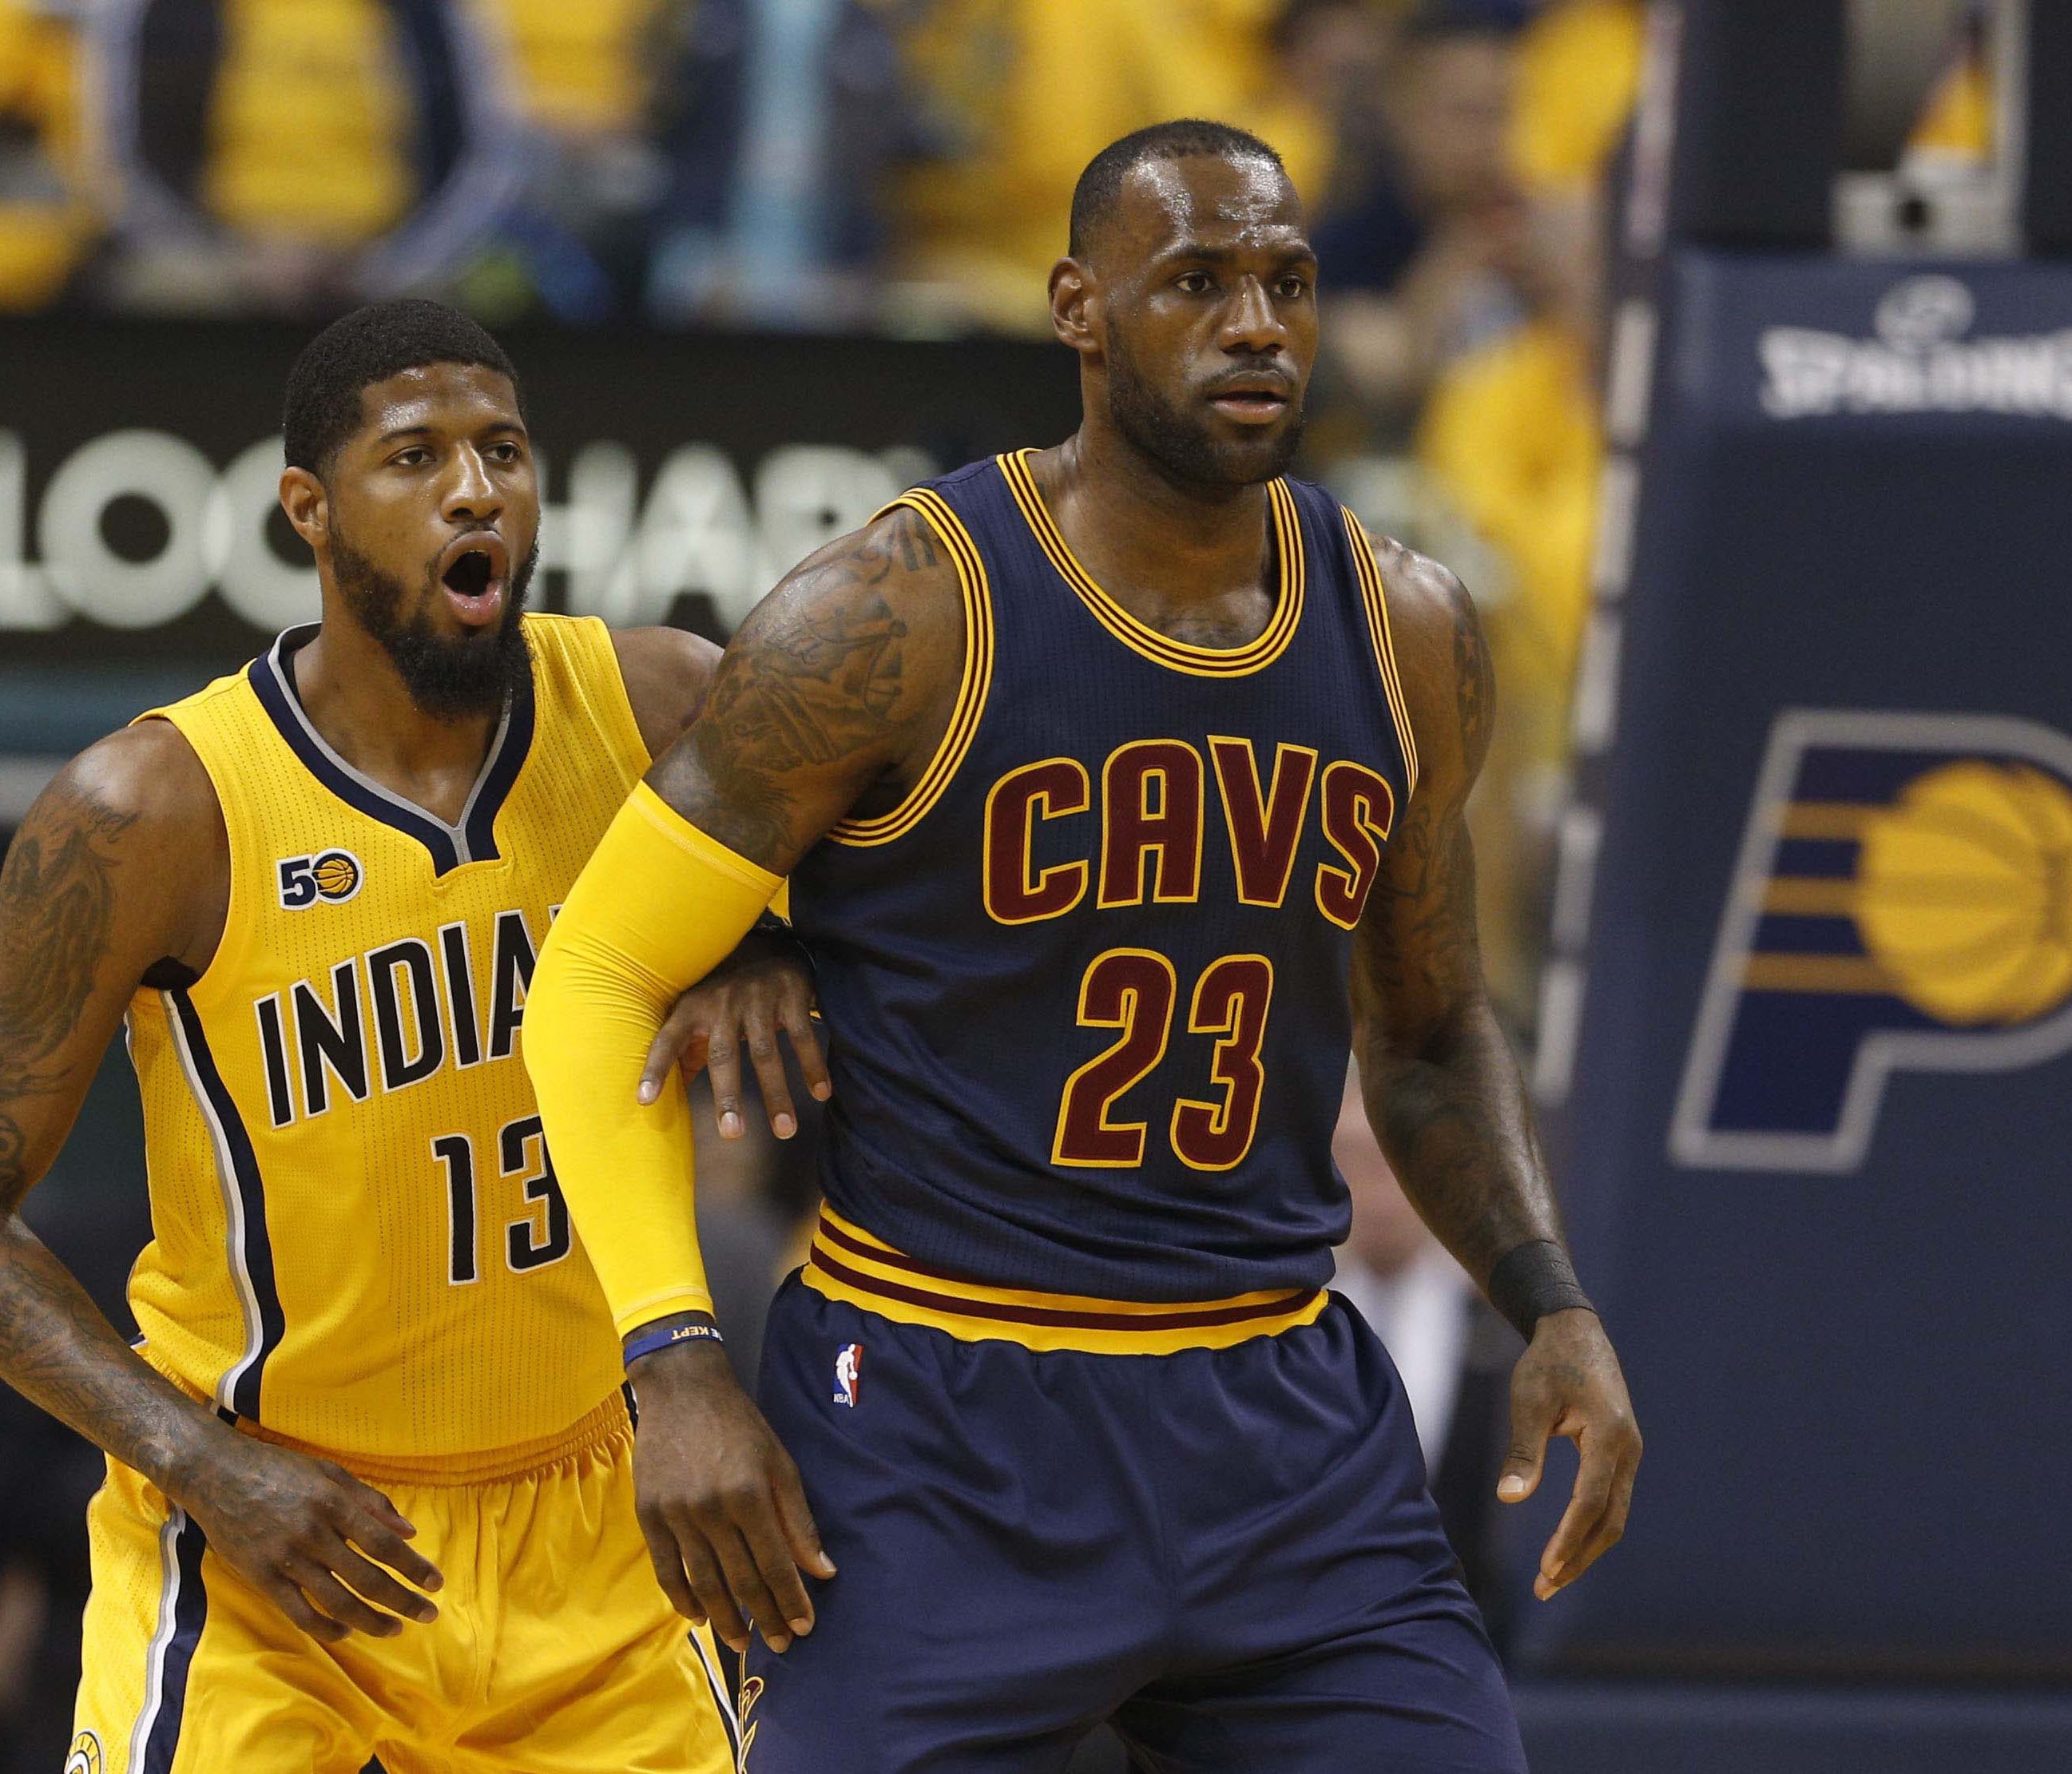 Apr 20, 2017; Indianapolis, IN, USA; Cleveland Cavaliers forward LeBron James (23) is guarded by Indiana Pacers forward Paul George (13) in game three of the first round of the 2017 NBA Playoffs at Bankers Life Fieldhouse. Mandatory Credit: Brian Spu